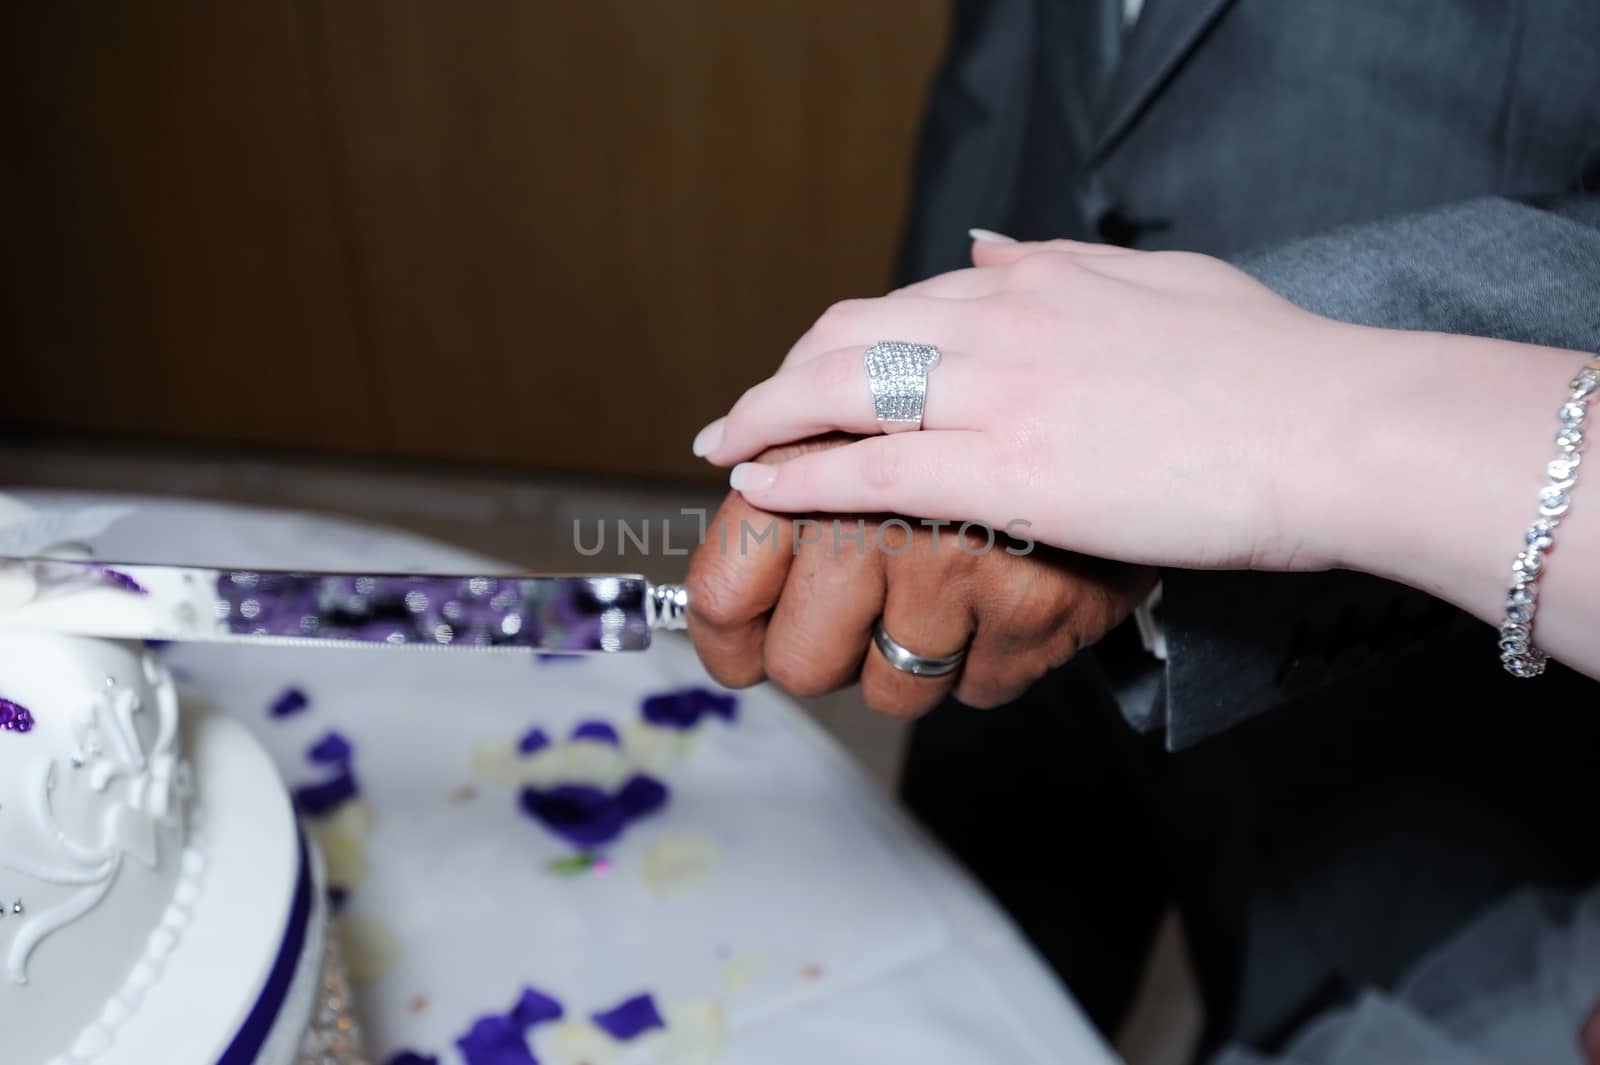 Bride and groom on wedding day cutting cake closeup showing rings and knife